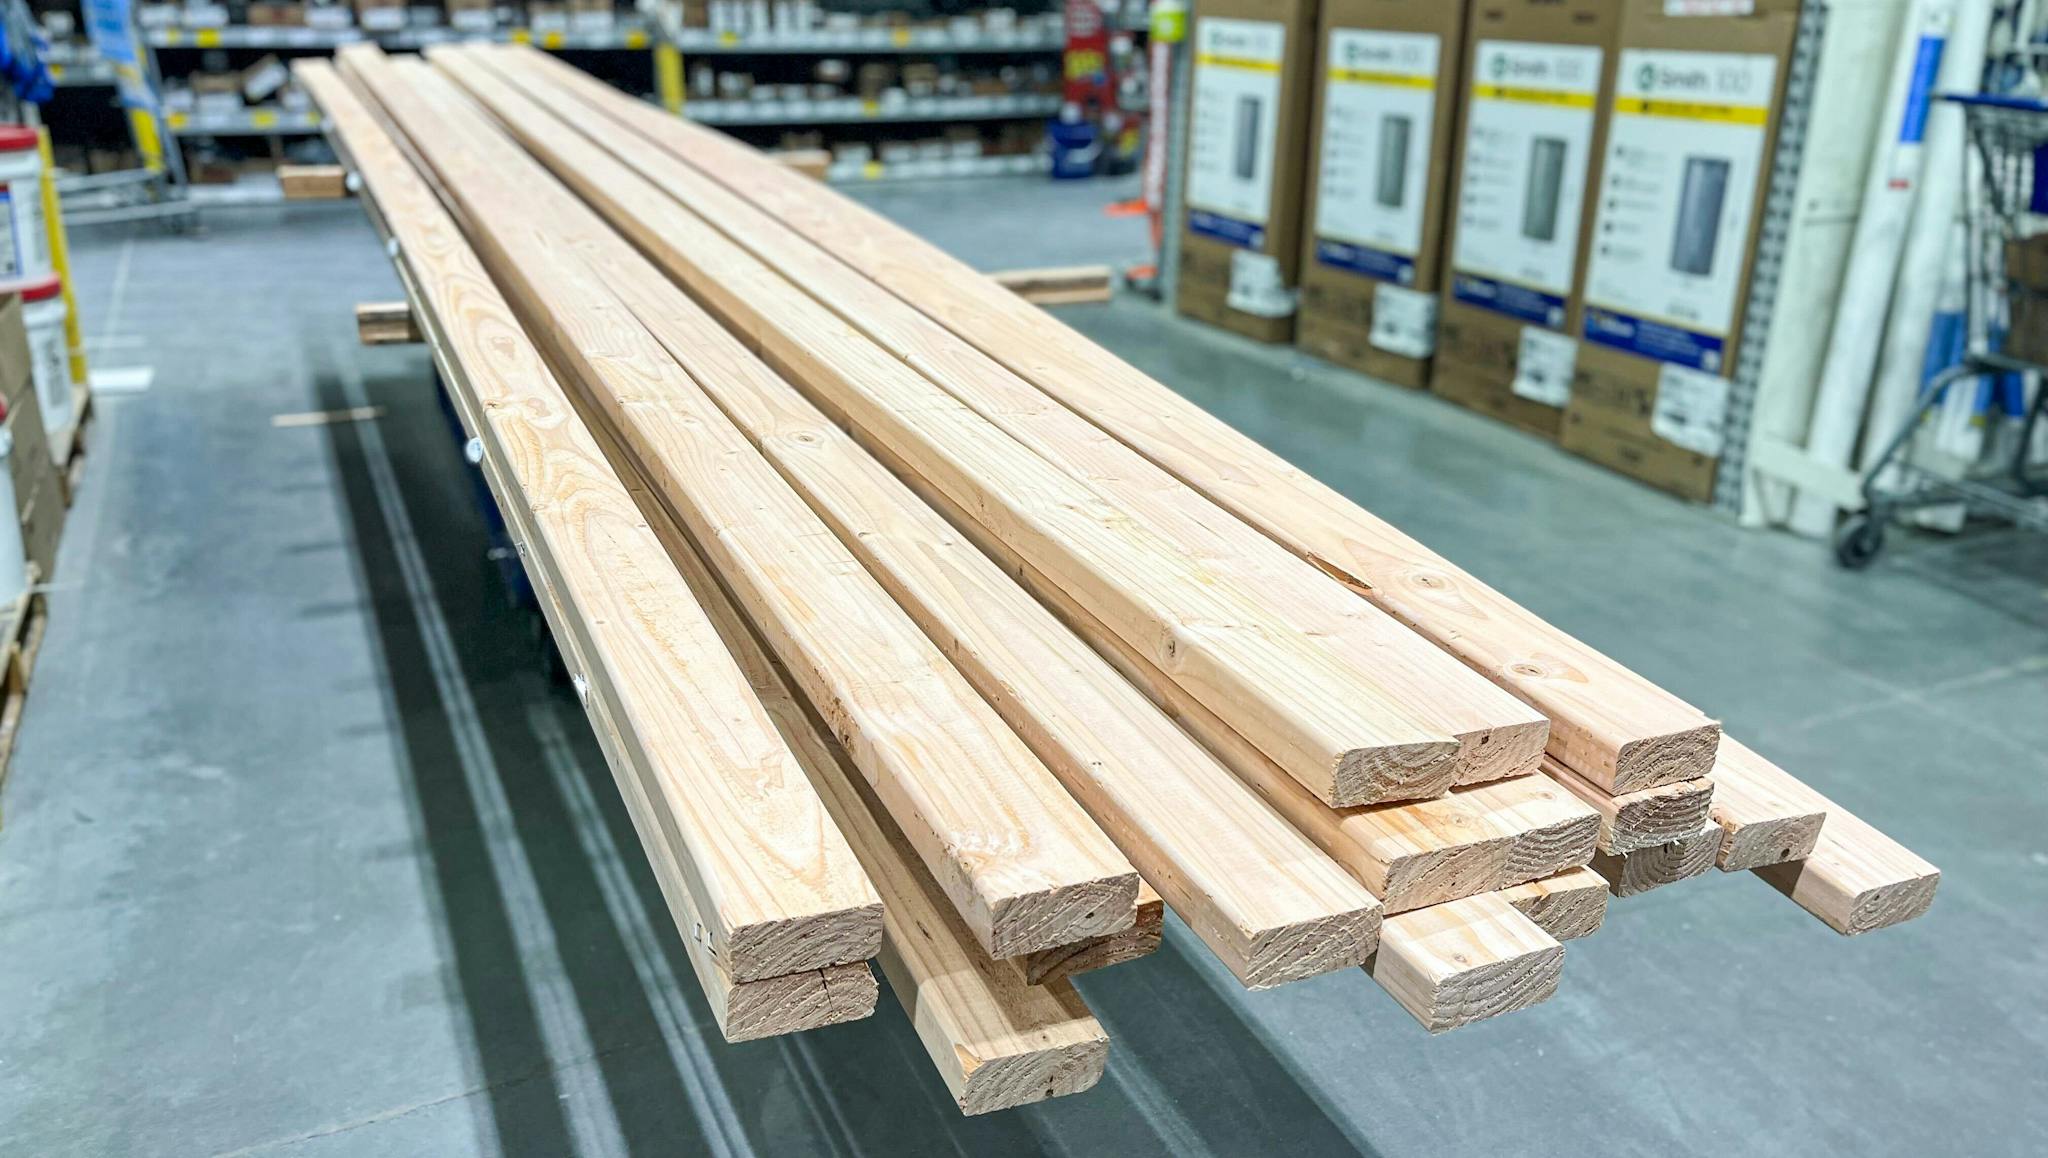 Free Wood Cuts at Lowe's: Here's What Comes With Every Lumber Purchase